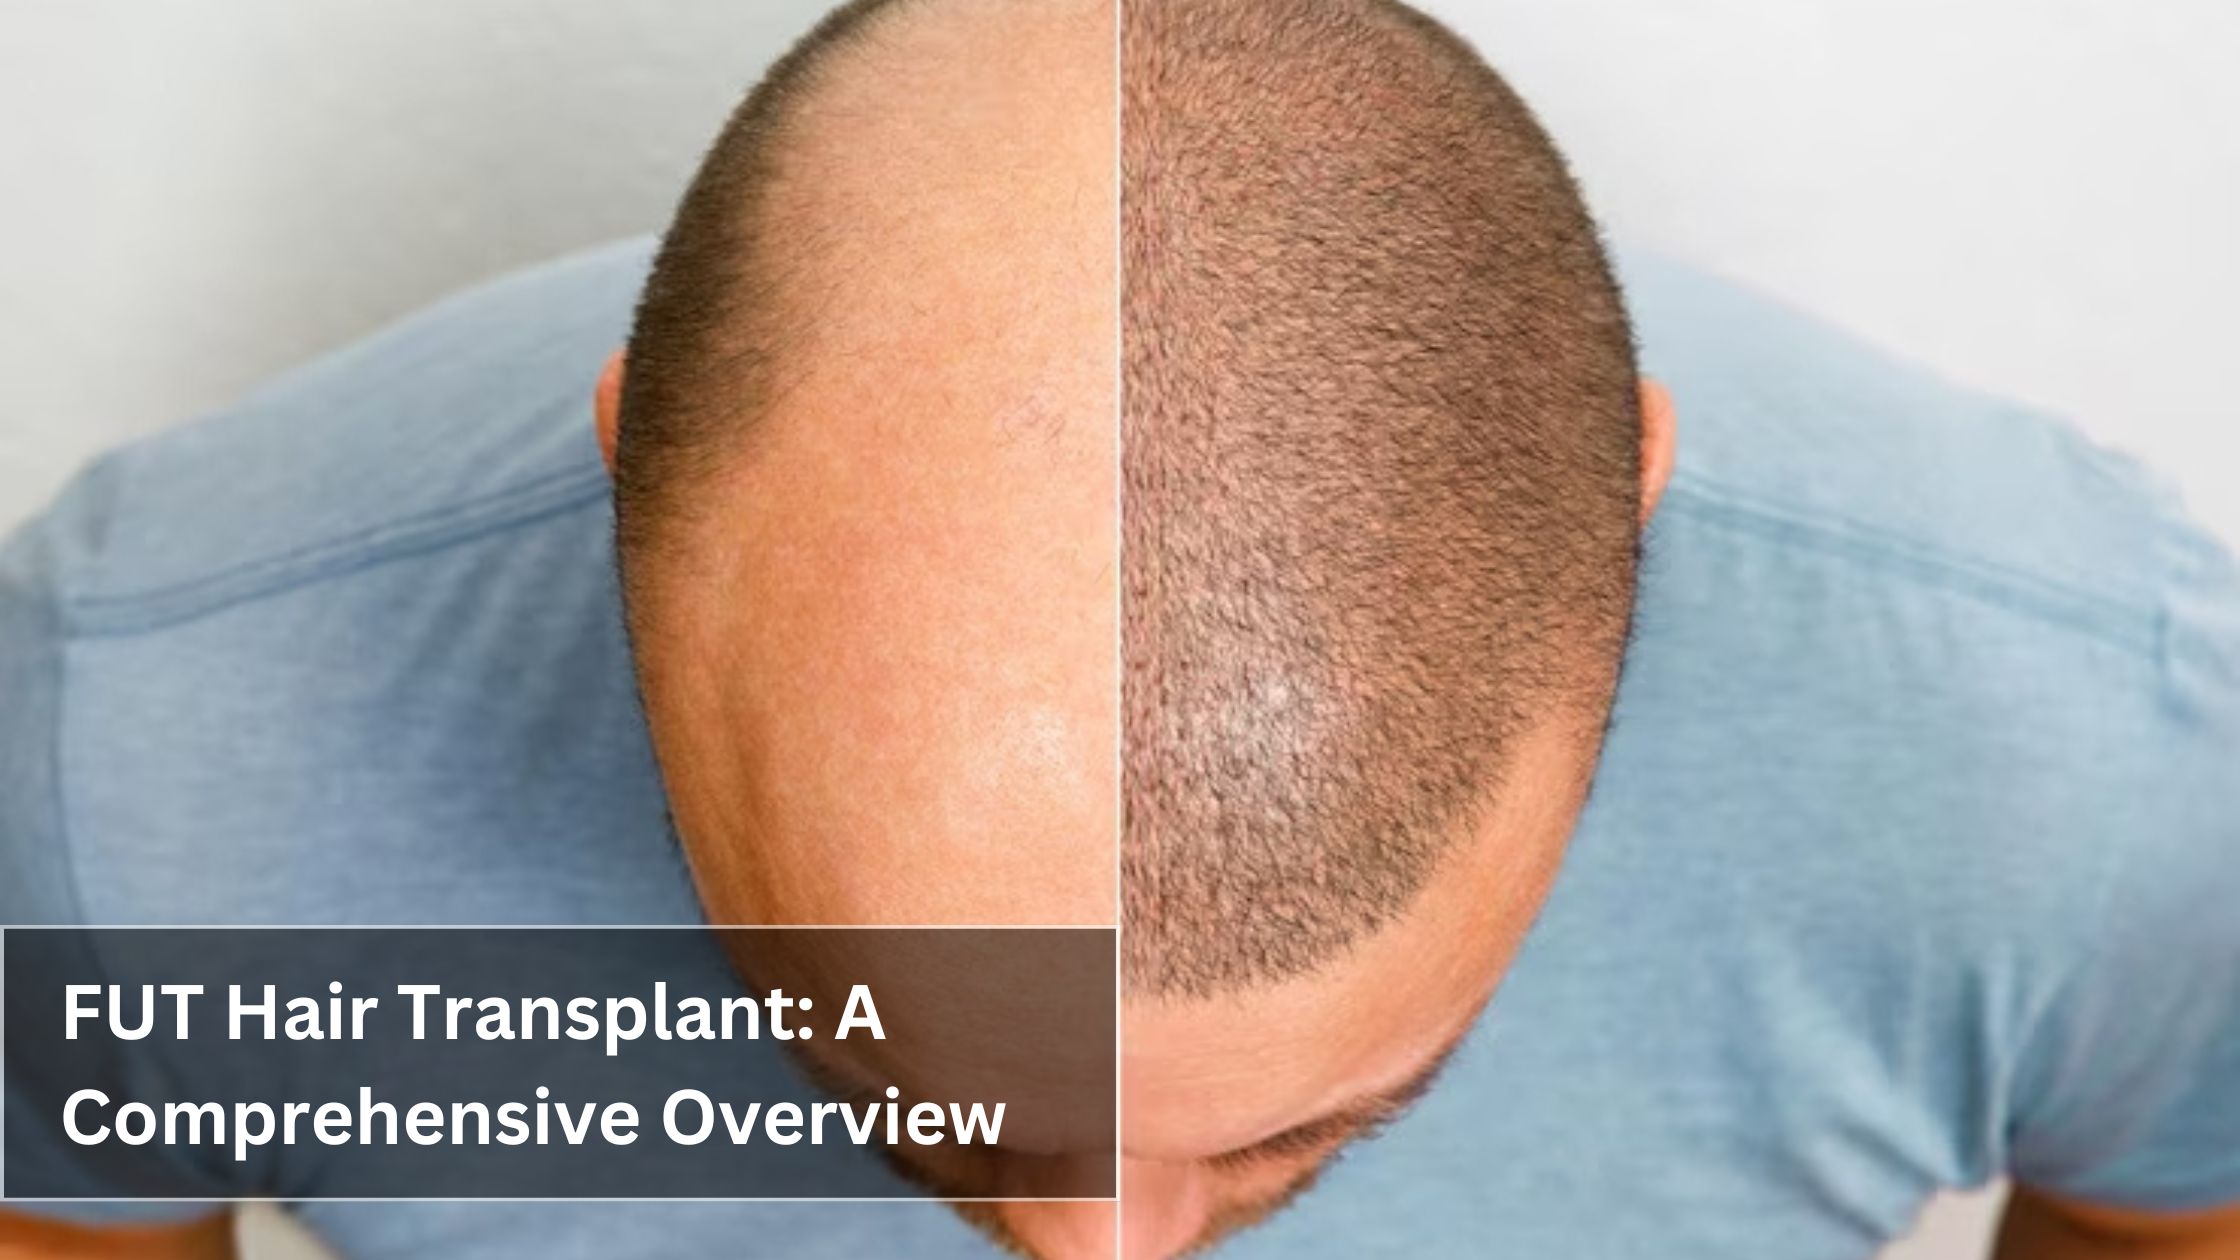 FUT Hair Transplant: A Comprehensive Overview